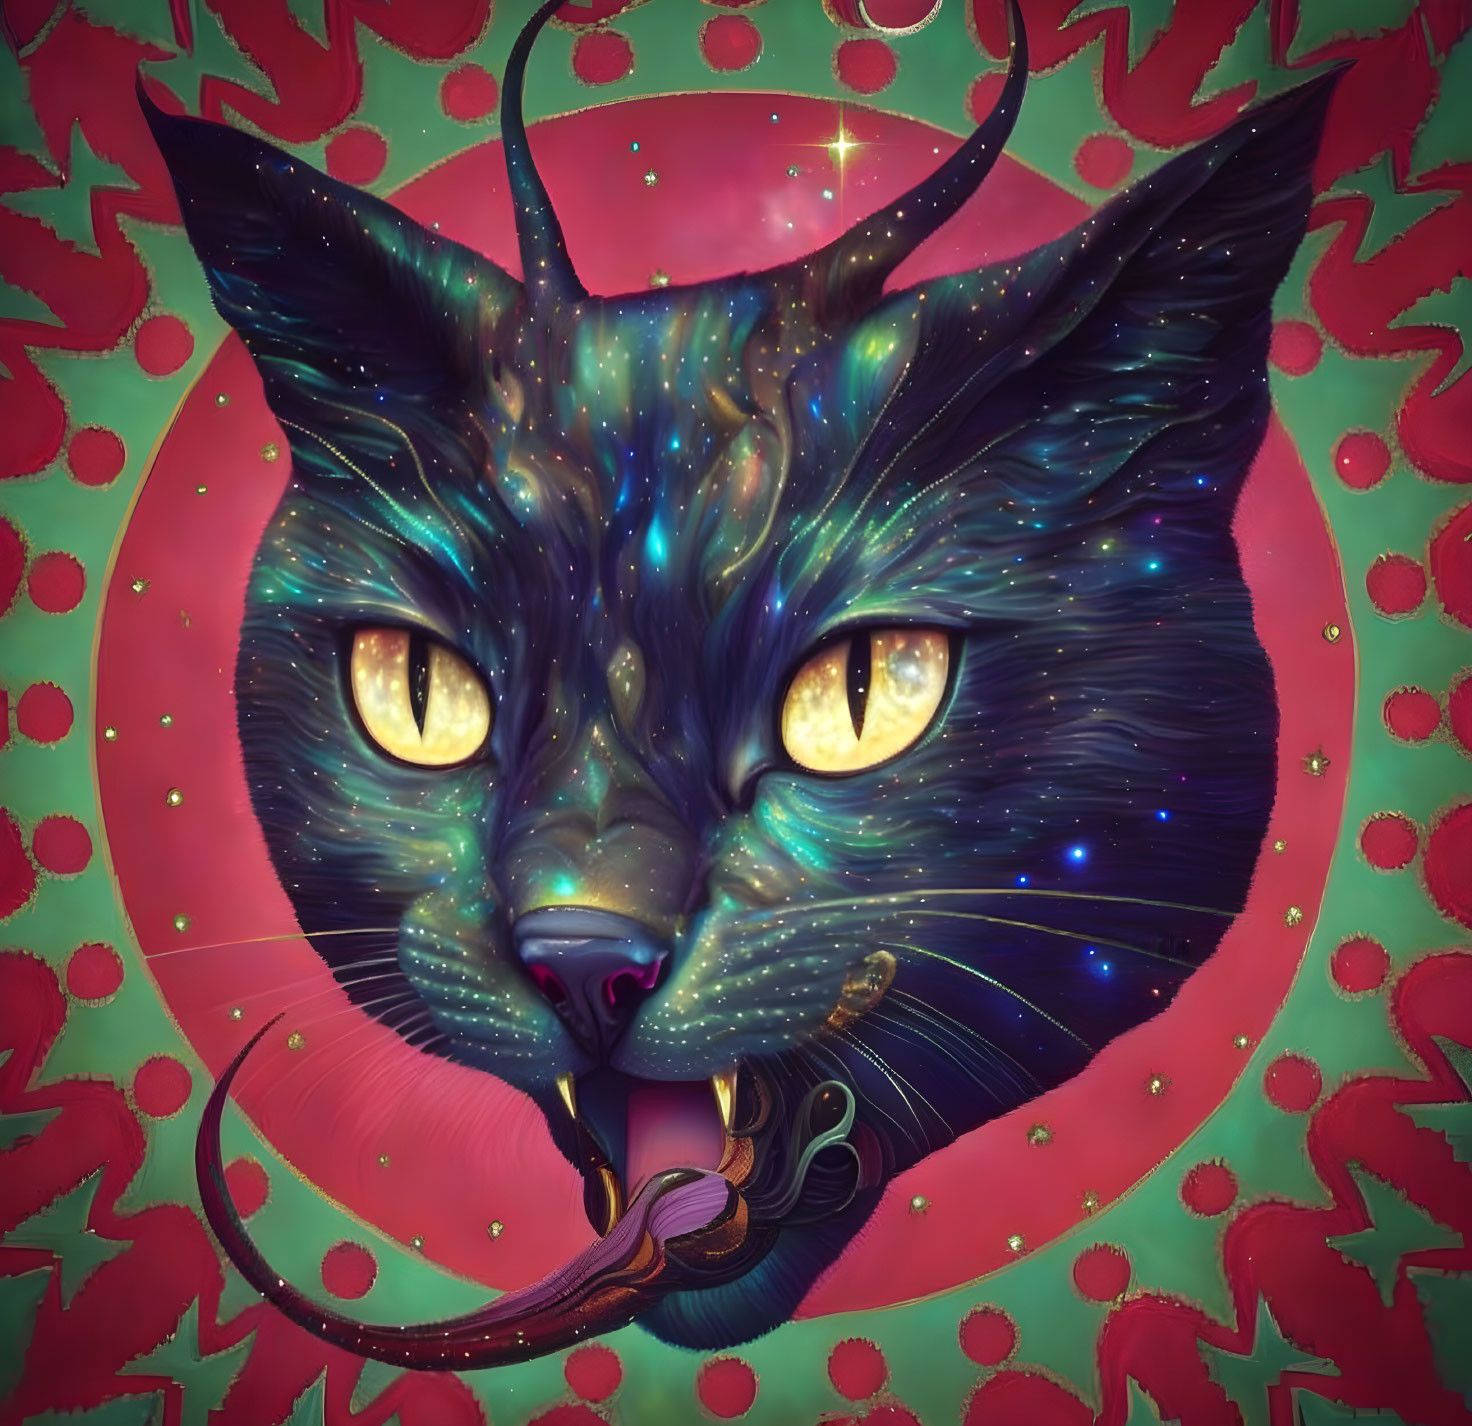 Cosmic cat illustration with starry fur and snake in mouth